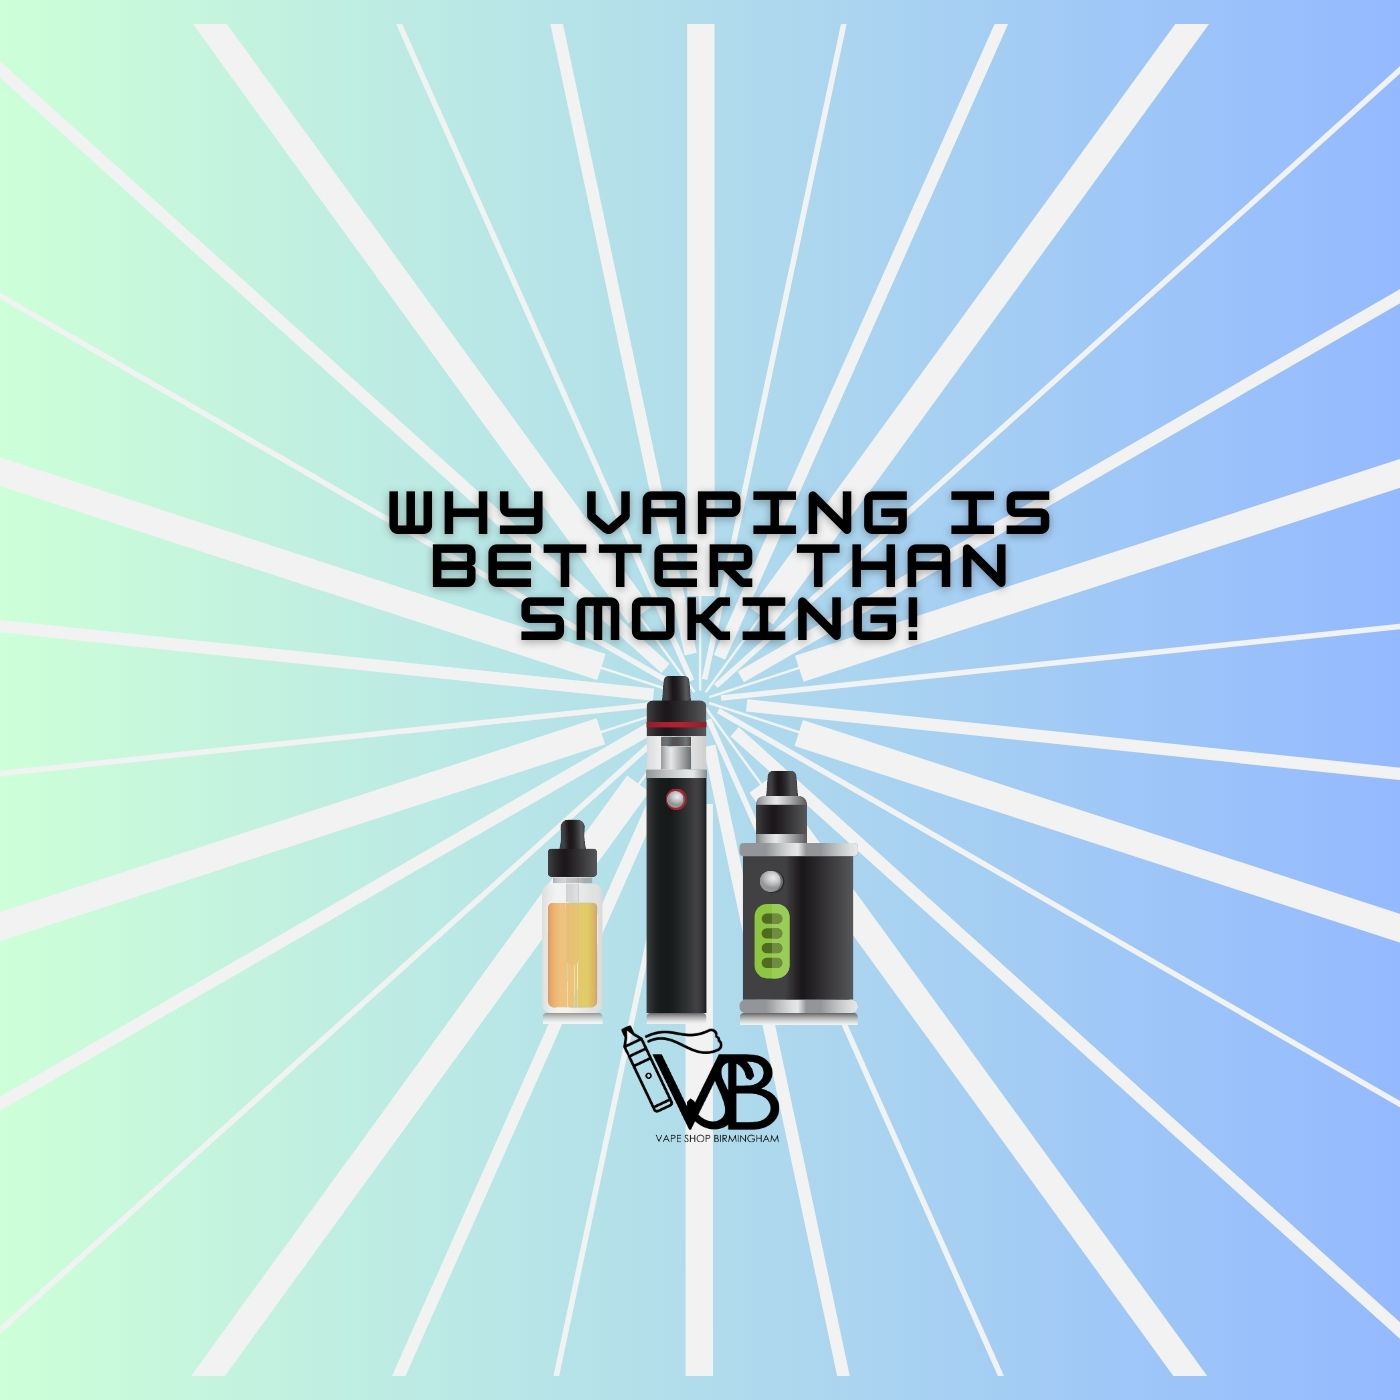 Why Vaping is Better Than Smoking!